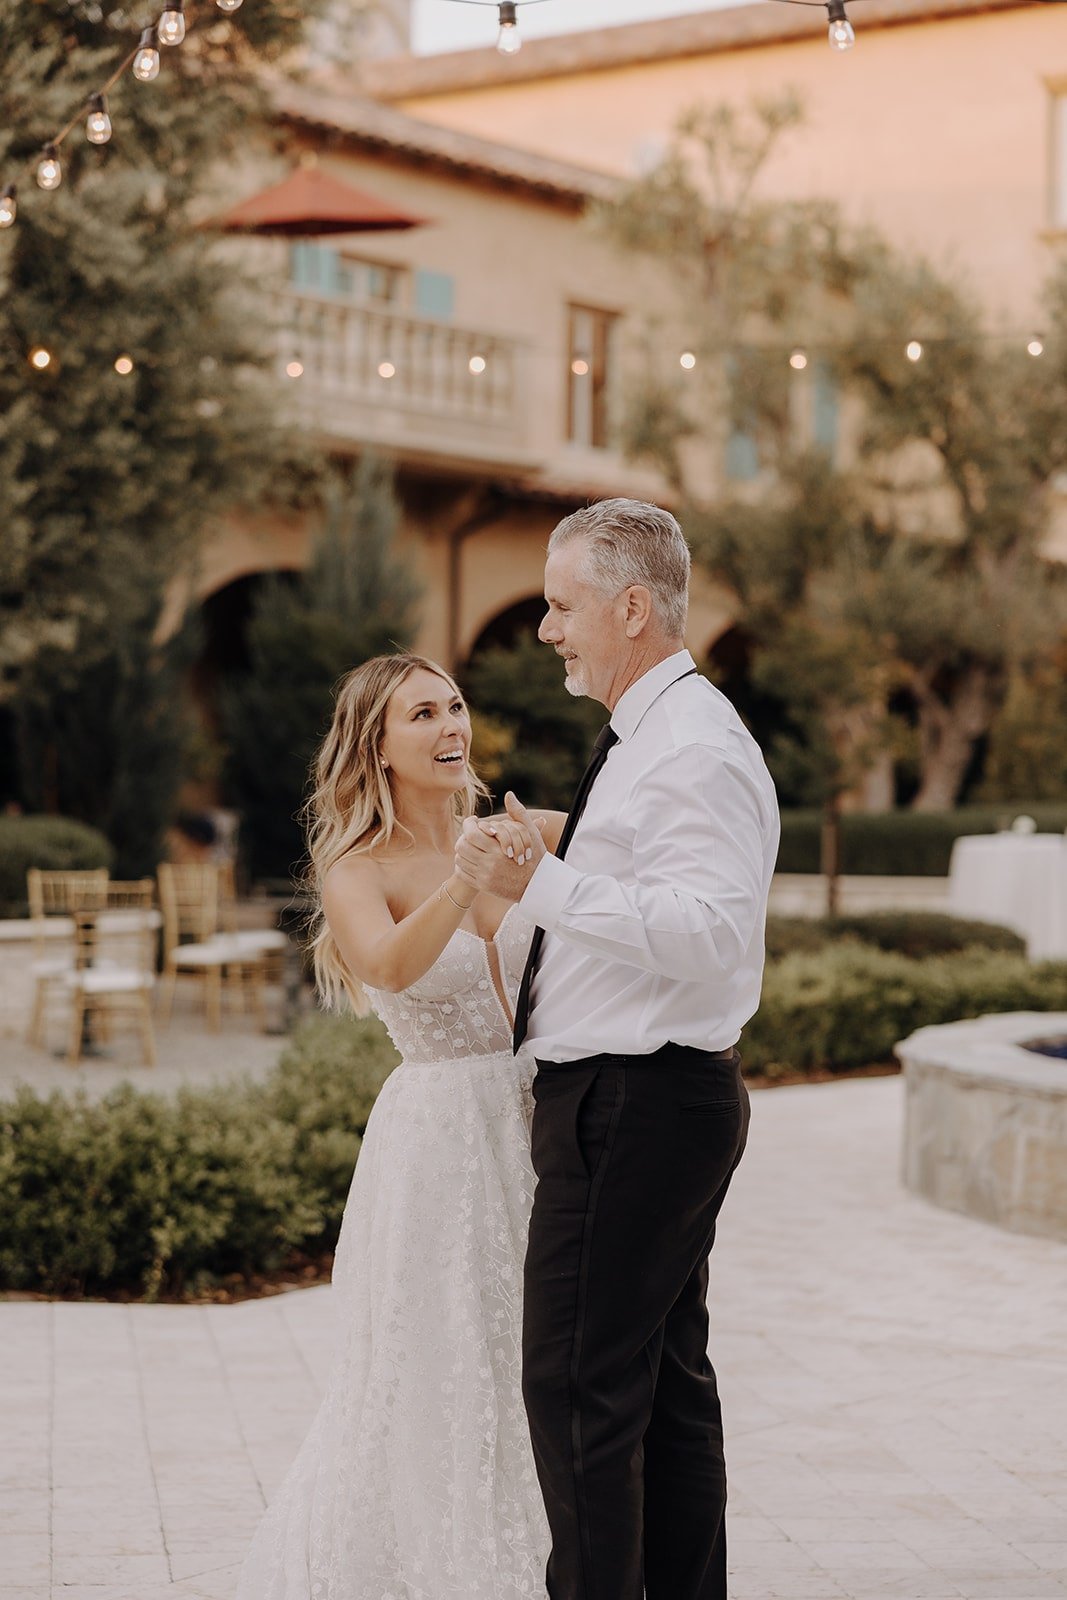 Bride first dance with father at Tuscan wedding venue in California